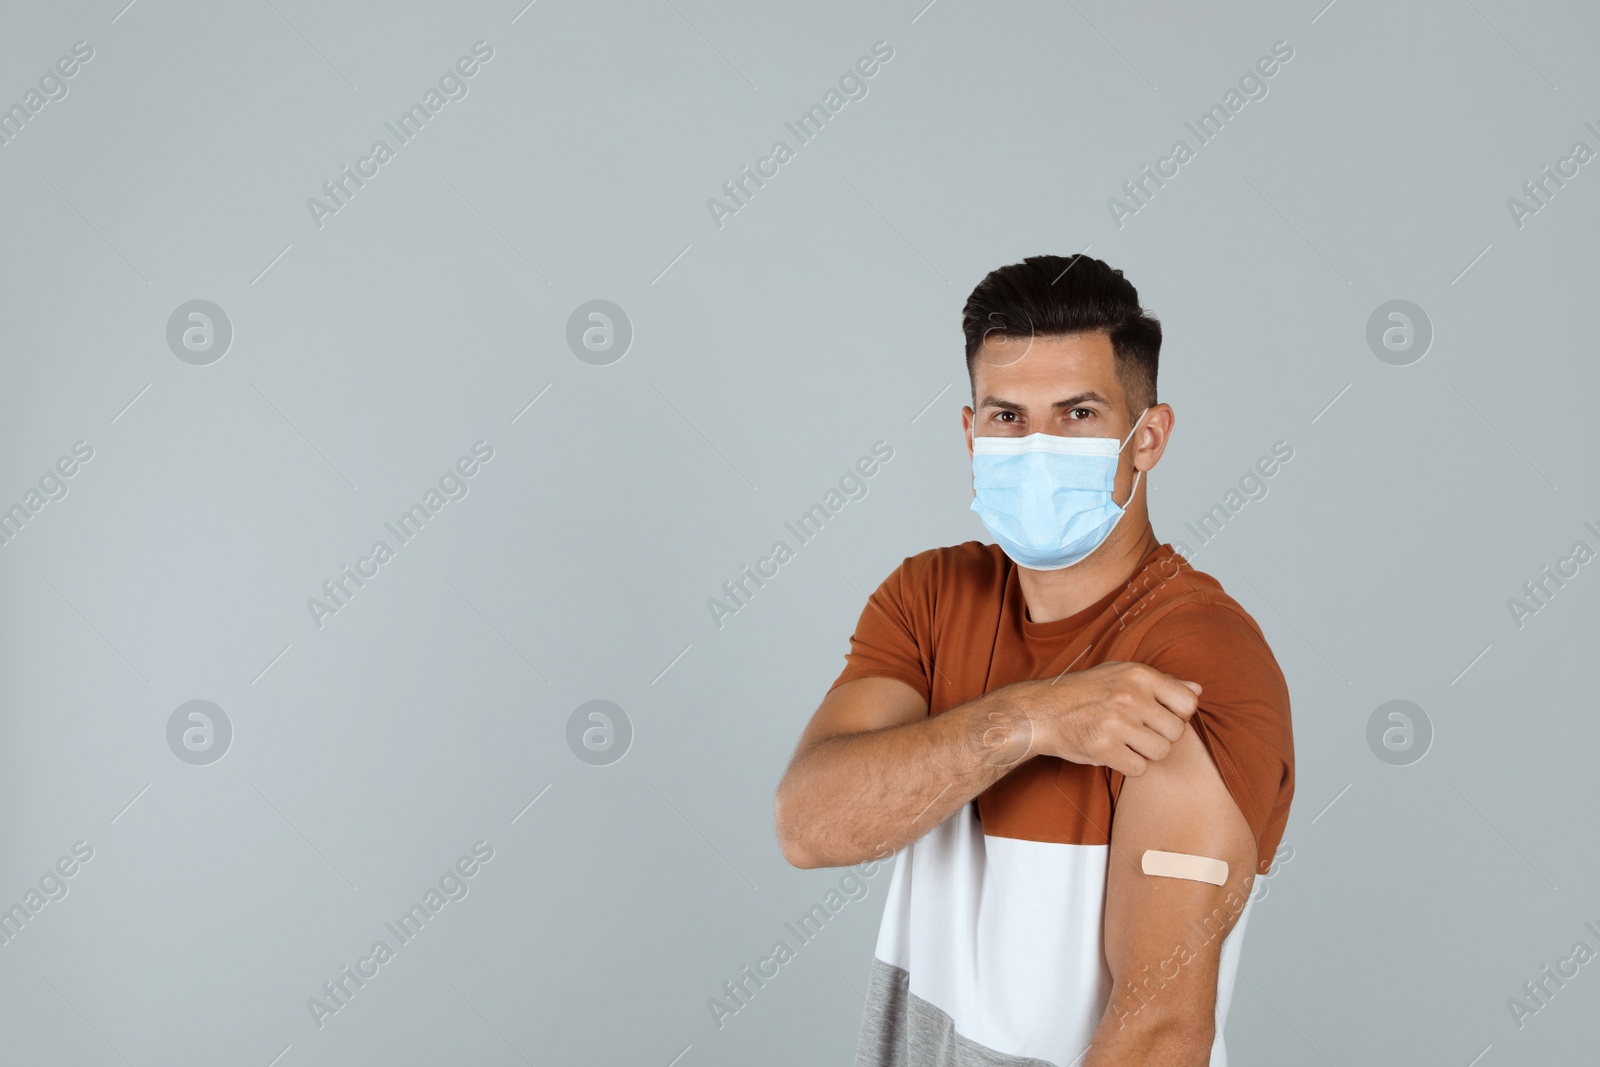 Photo of Vaccinated man with protective mask showing medical plaster on his arm against grey background. Space for text